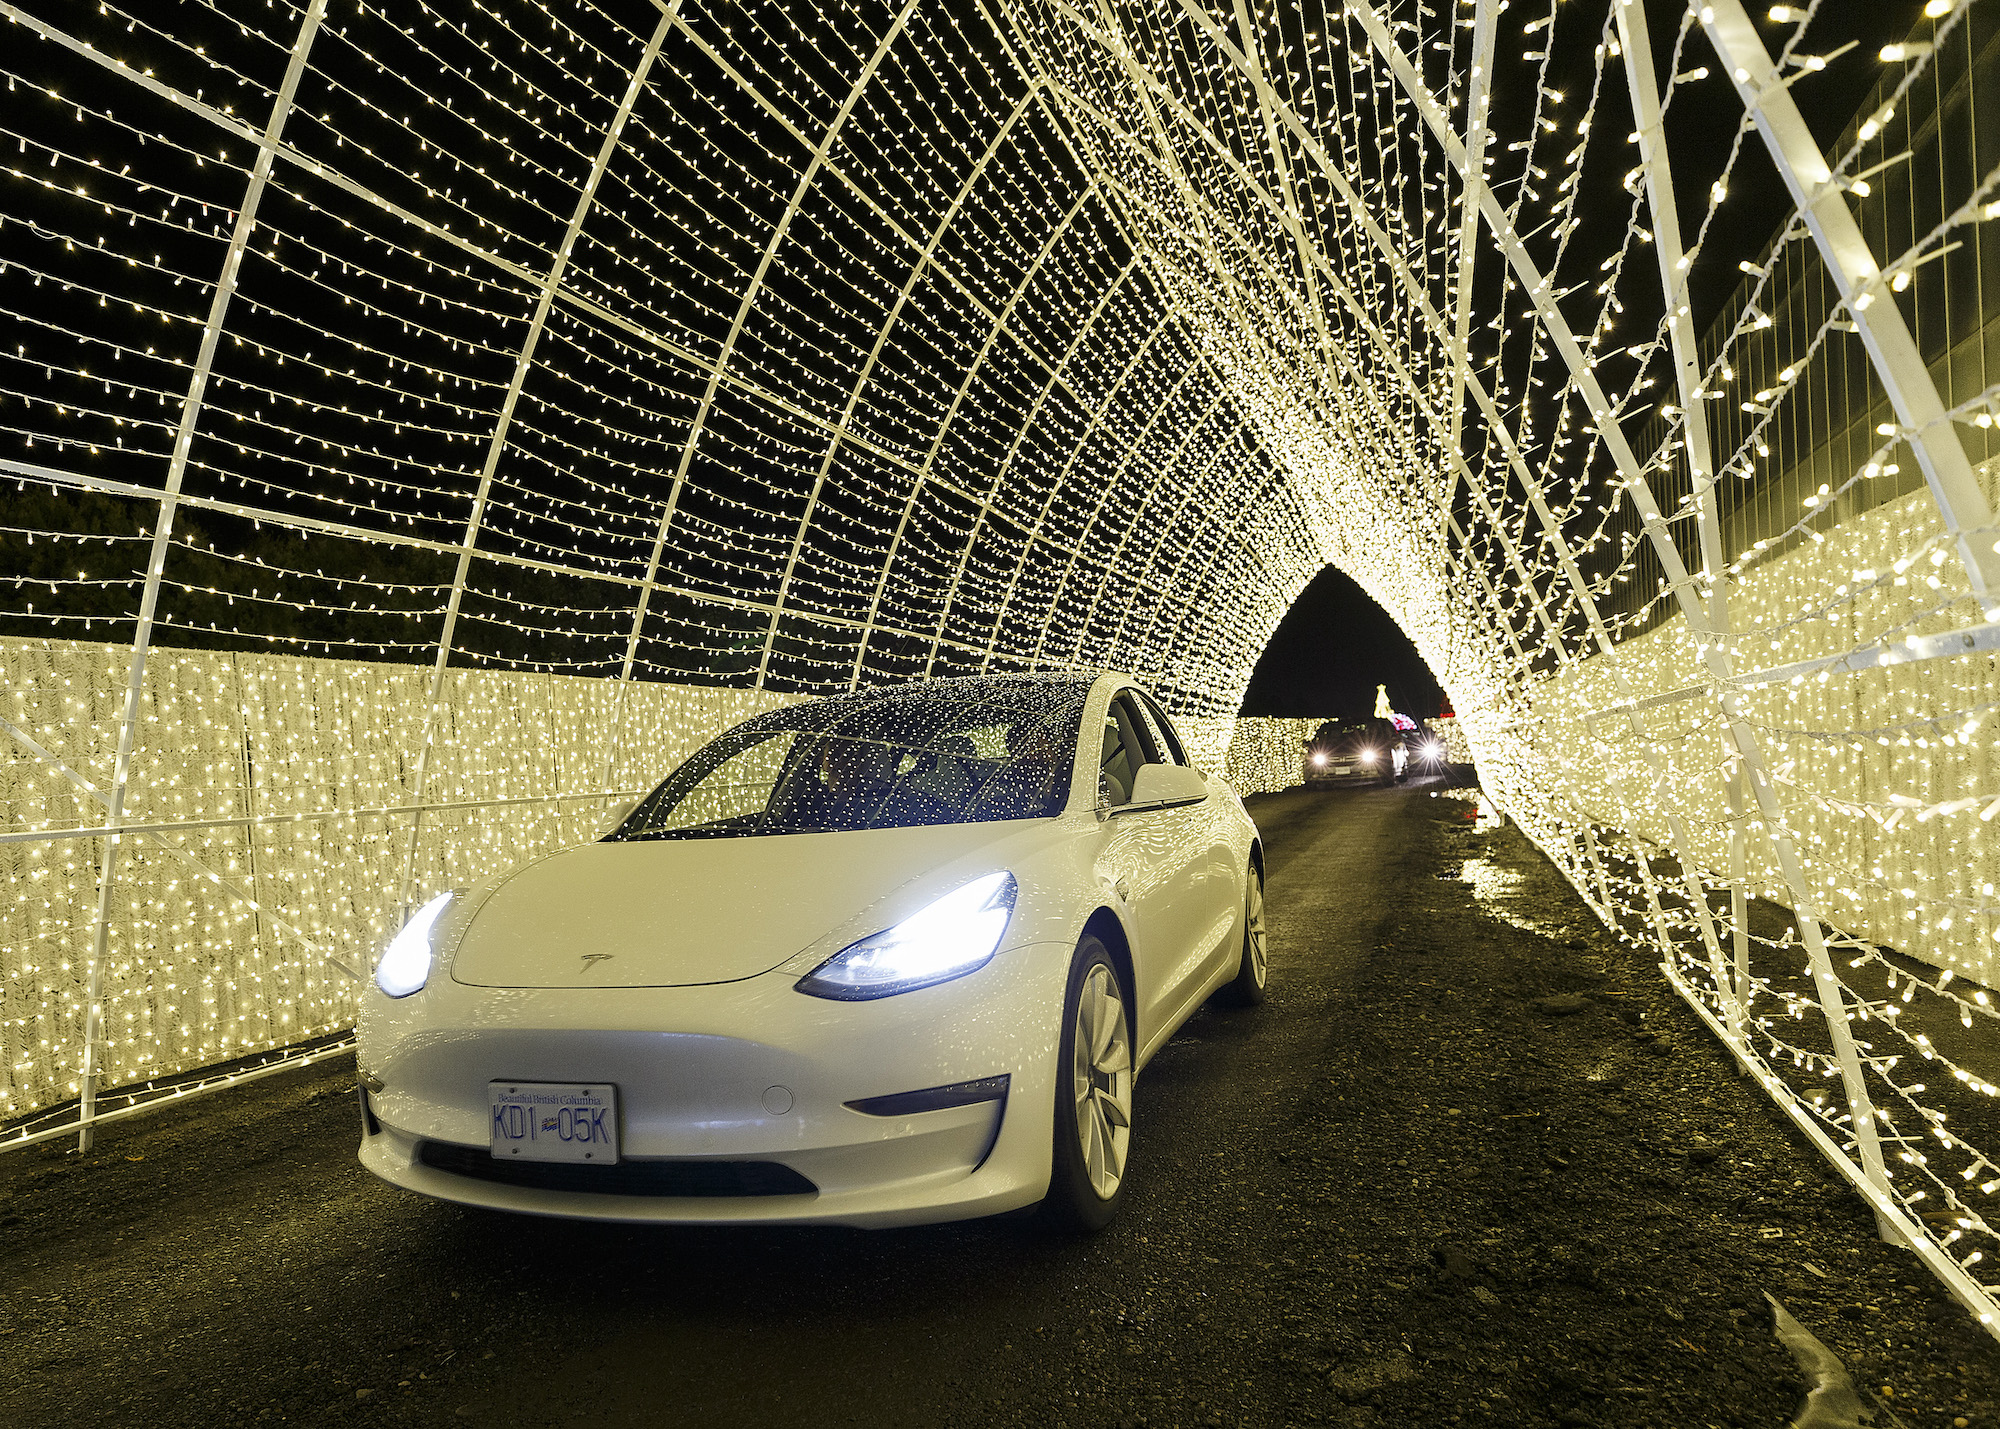 An electric vehicle passes through a Christmas light tunnel display at the Christmas Glow in Langley: Drive-Through Holiday Light Event at Milner Village Garden Centre on December 11, 2020, in Langley, British Columbia, Canada.